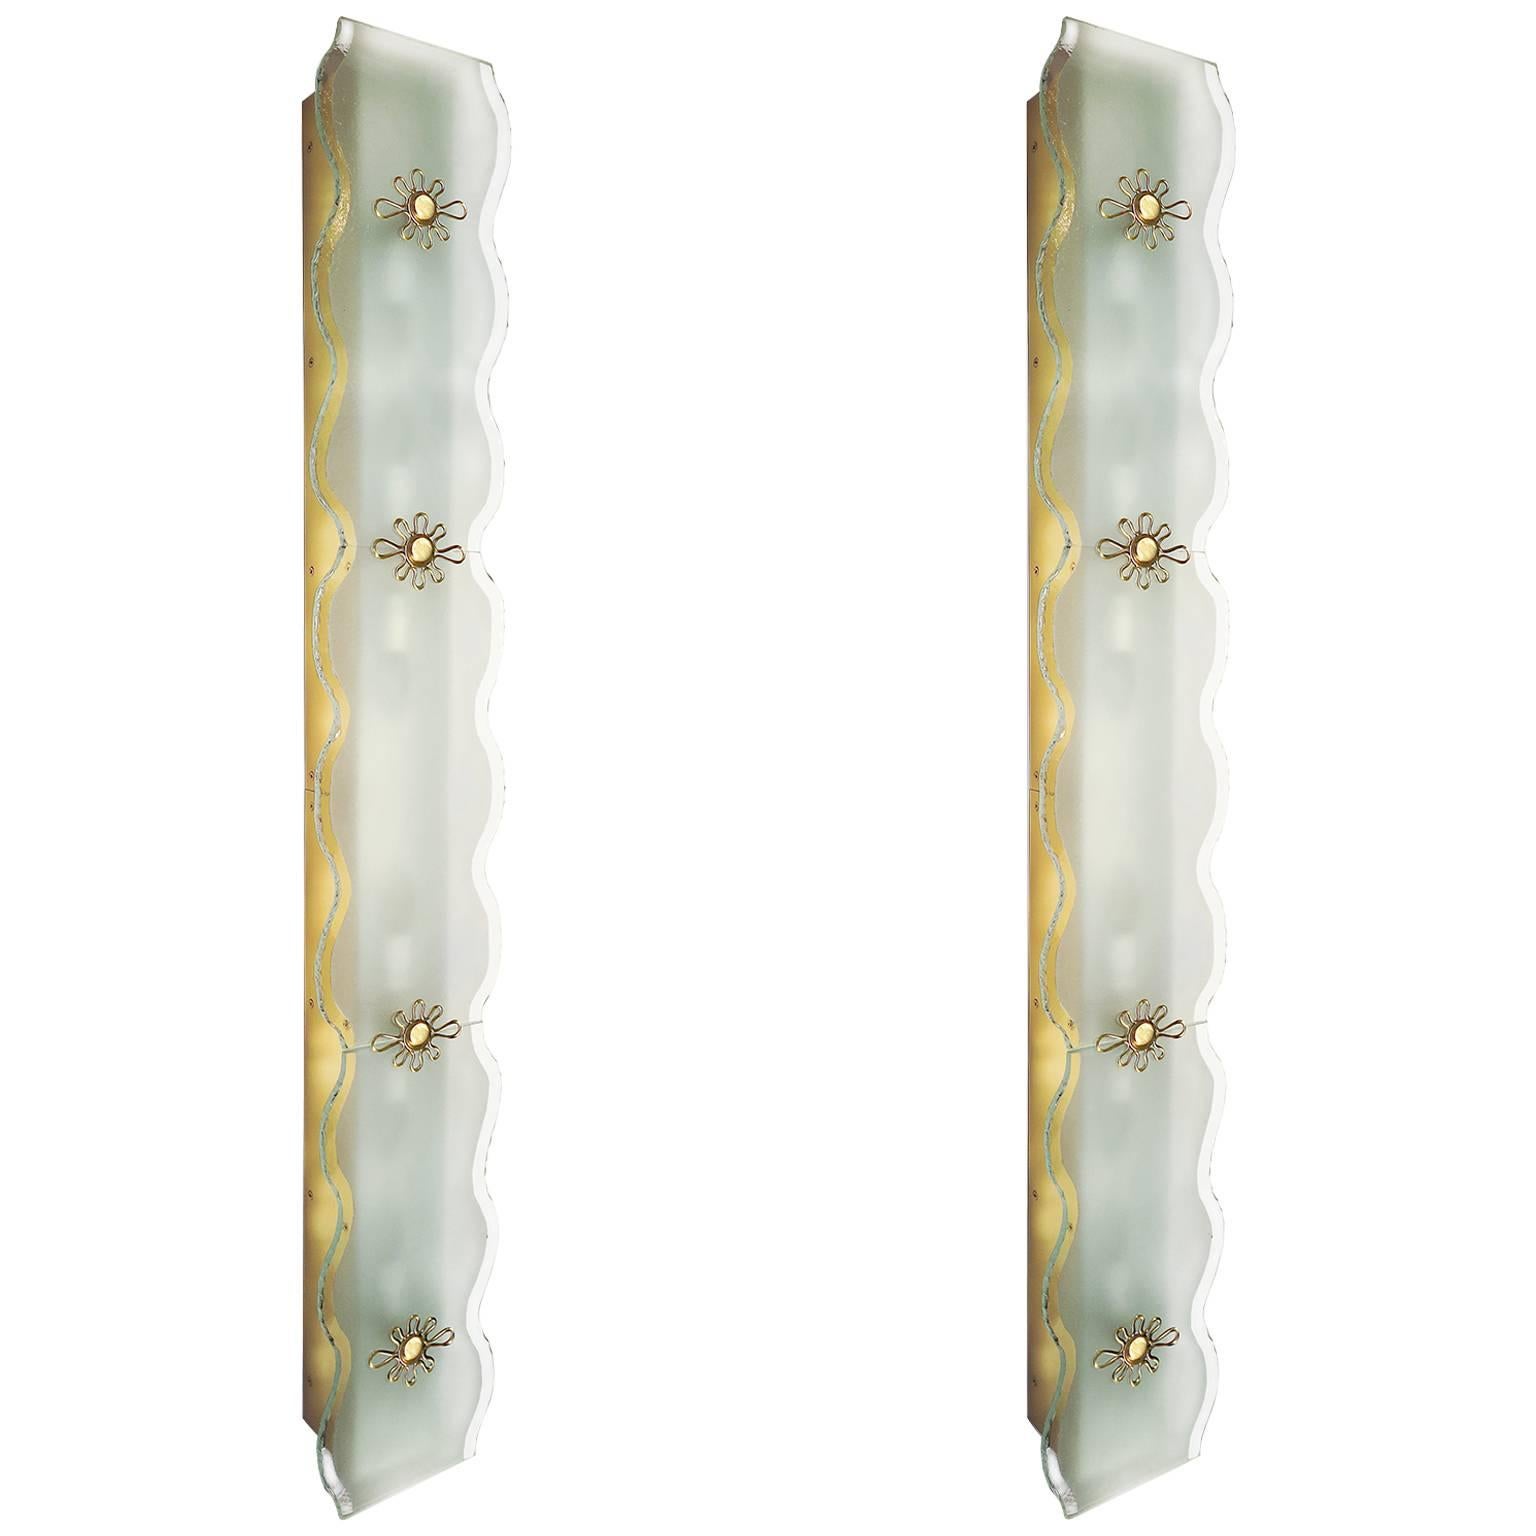 Scandinavian Modern Large Wall Sconces or Ceiling Flush Lamps Frosted Glass